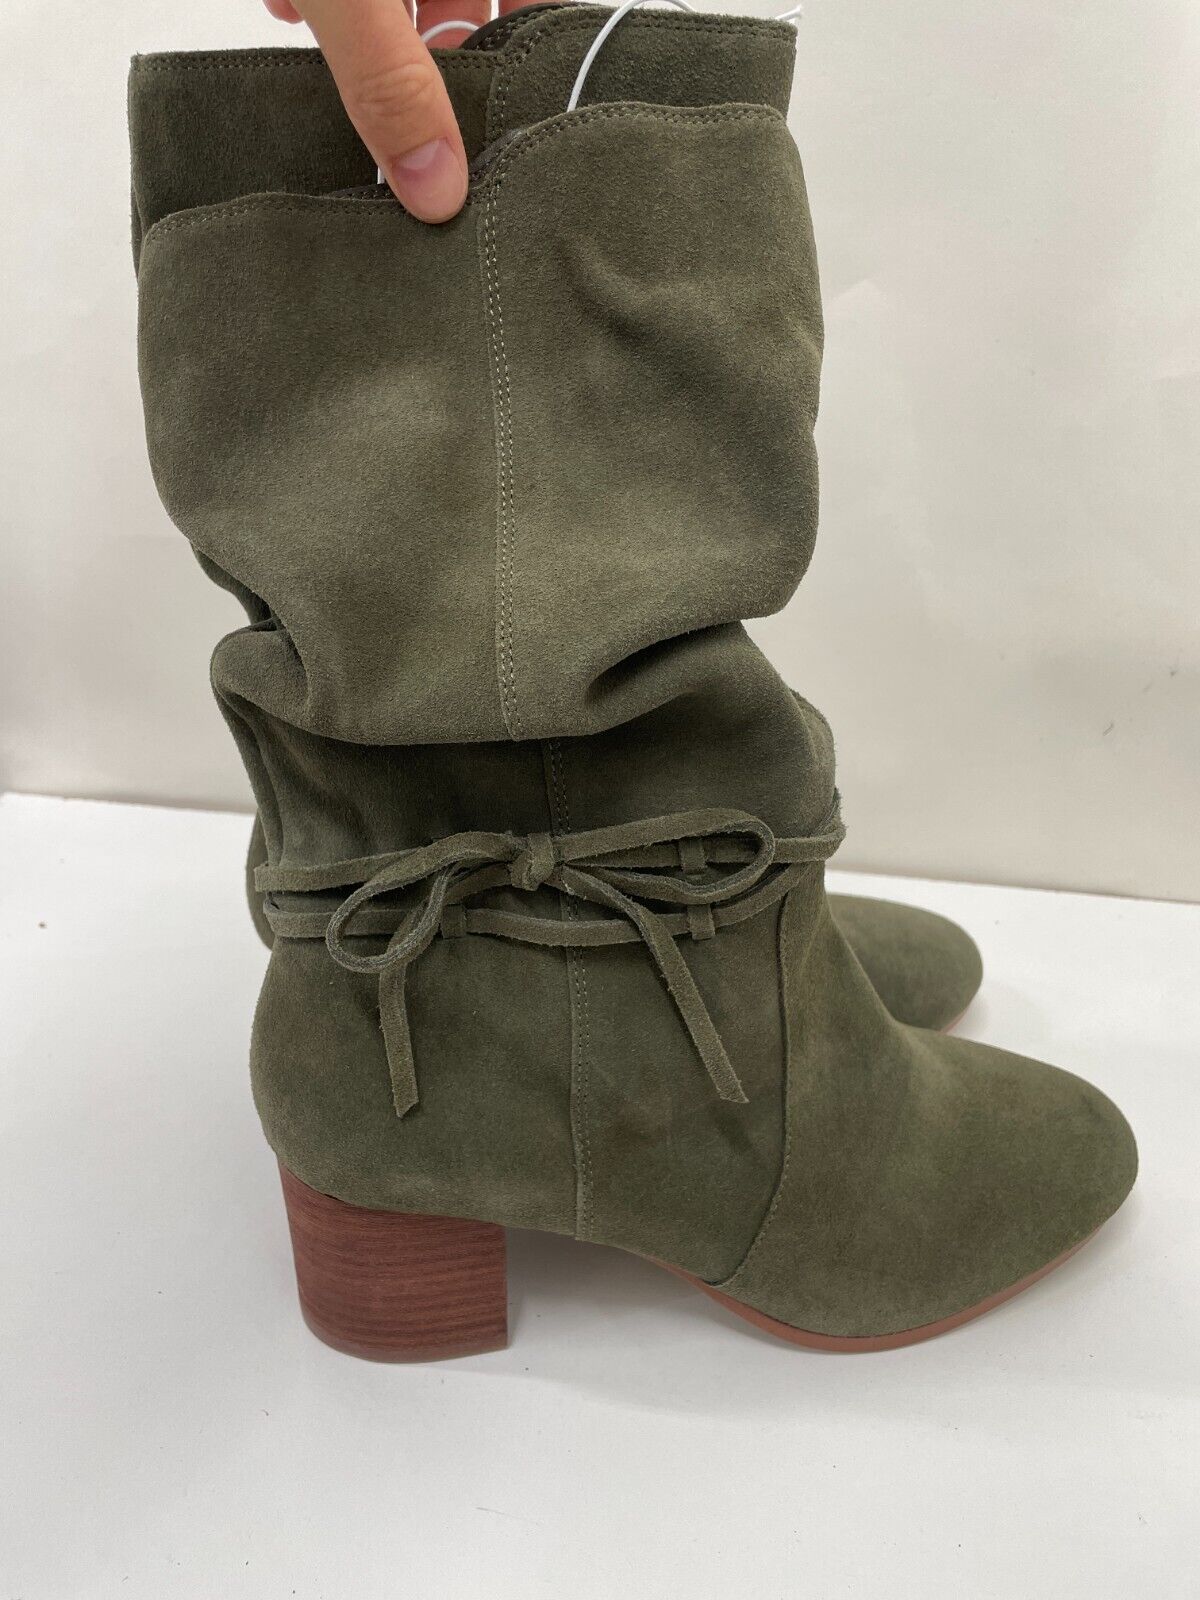 Violet & Red Womens 9M Janine Mid-Calf Faux Suede Boots Green Zip Closure